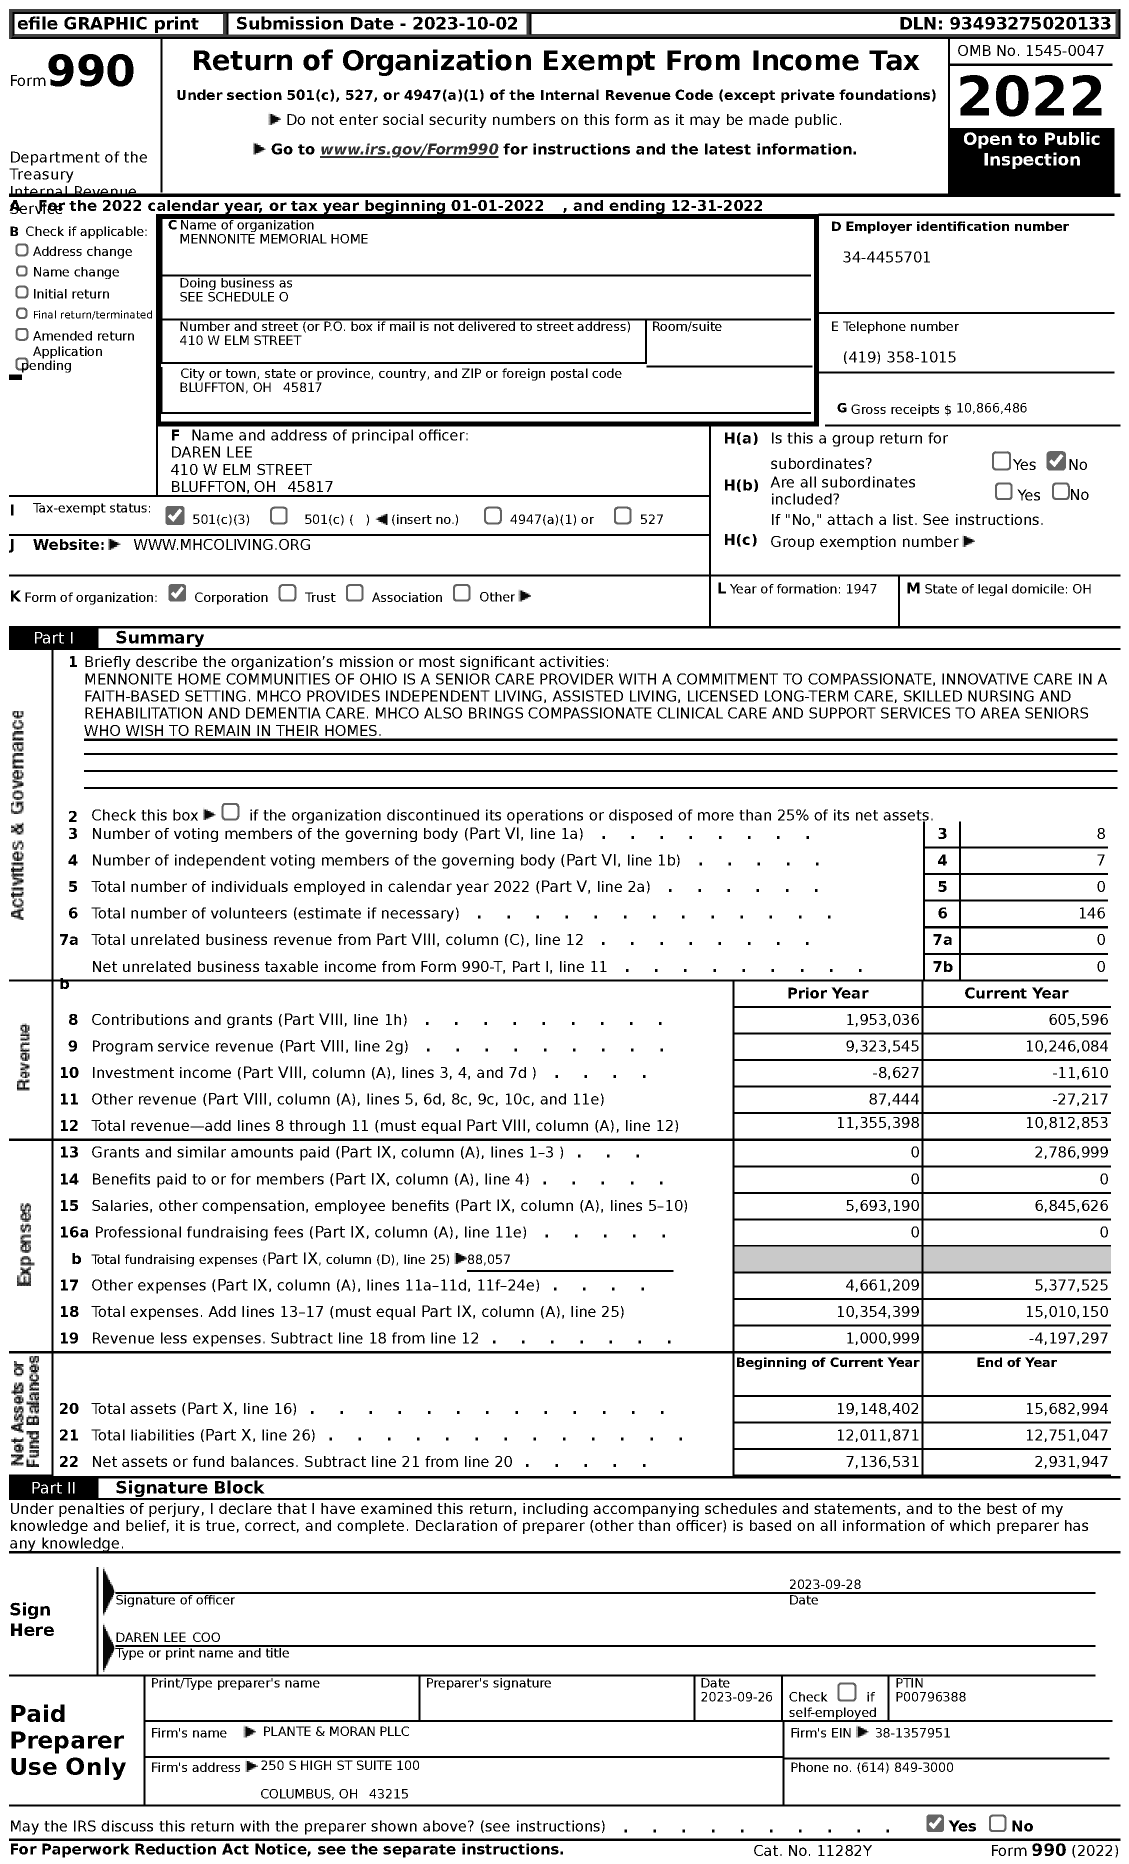 Image of first page of 2022 Form 990 for Mennonite Home Communities of Ohio (MHCO)